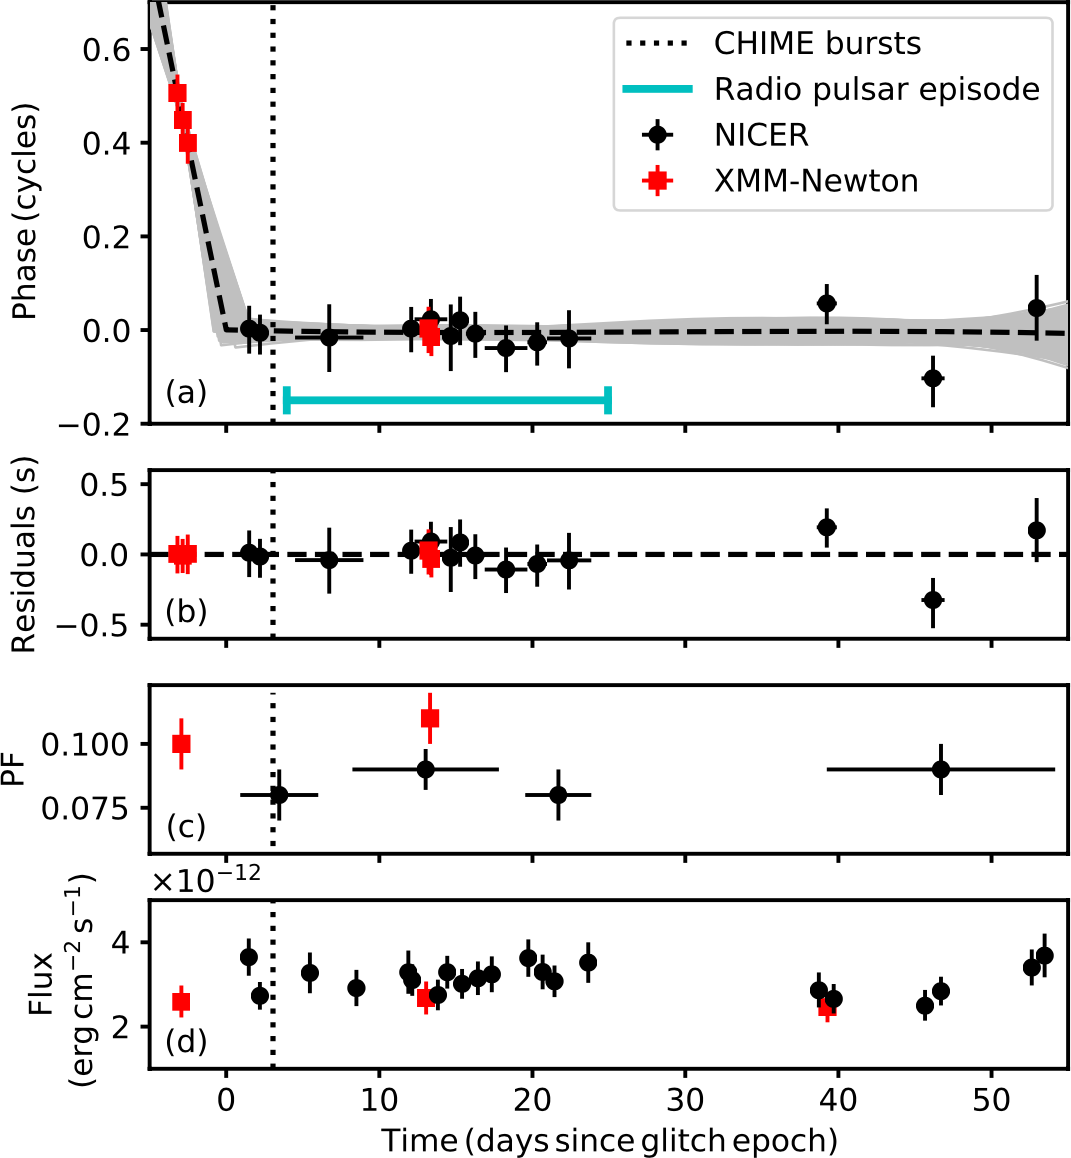  Spin and X-ray properties of magnetar SGR 1935+2154 in the days before and after an apparent 'spin-down glitch' on October 5, 2020. Panel (a) shows the neutron star's rotation phase as measured with NICER (black points) and ESA's XMM-Newton telescope (red points), assuming a spin model derived from the post-glitch data such that all points are consistent with zero phase; the three XMM-Newton measurements at far left are not consistent with this model and provide strong evidence for the glitch at time zero in this figure. The long-dashed line captures both the pre- and post-glitch model behavior. The vertical dotted line corresponds to the time of three rapid radio bursts detected by the CHIME telescope, and the cyan horizontal bar indicates the interval during which the FAST telescope detected persistent radio pulsations with the magnetar's known 3.25 sec spin period. Panel (b) similarly shows 'residuals' (observed minus expected) pulse phase given the full model in panel (a). Panel (c) shows the constancy of the fraction of X-rays emitted by SGR 1935 that are found to be pulsed, averaging approximately 8%. Panel (d) demonstrates that the X-ray brightness of SGR 1935 did not change appreciably before or after the glitch, nor on either side of the radio bursts detected with CHIME. Figure from Younes et al. 2022 (Nature Astronomy, in press).